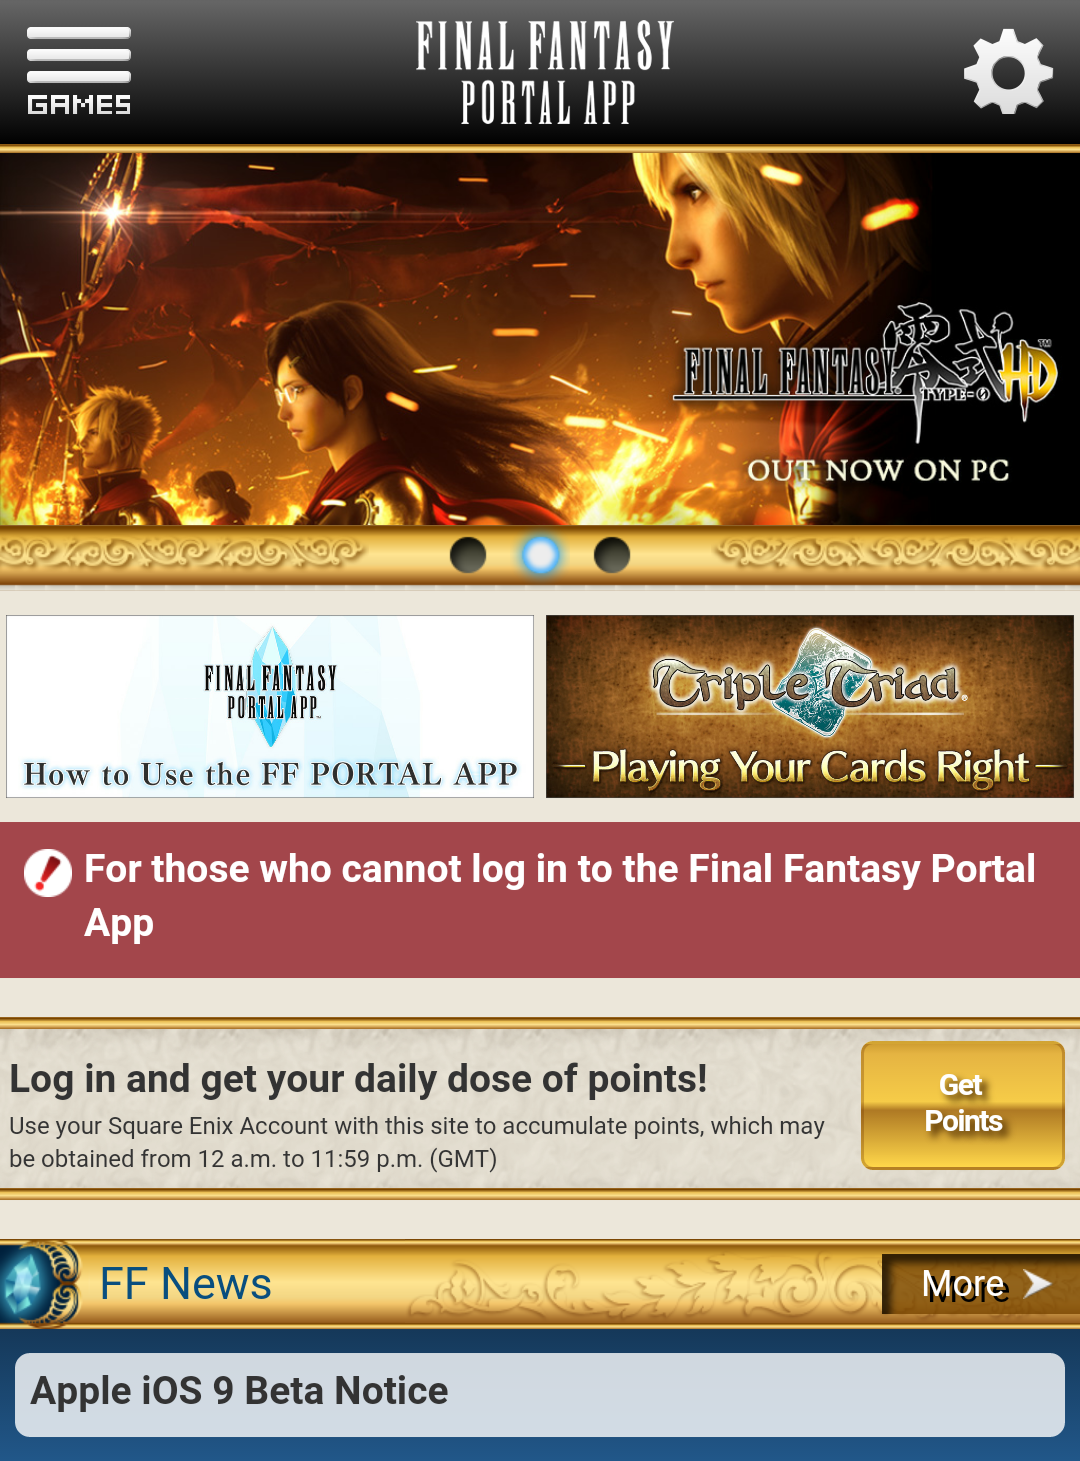 New SE App Leaves Something To Be Desired By Fans - 